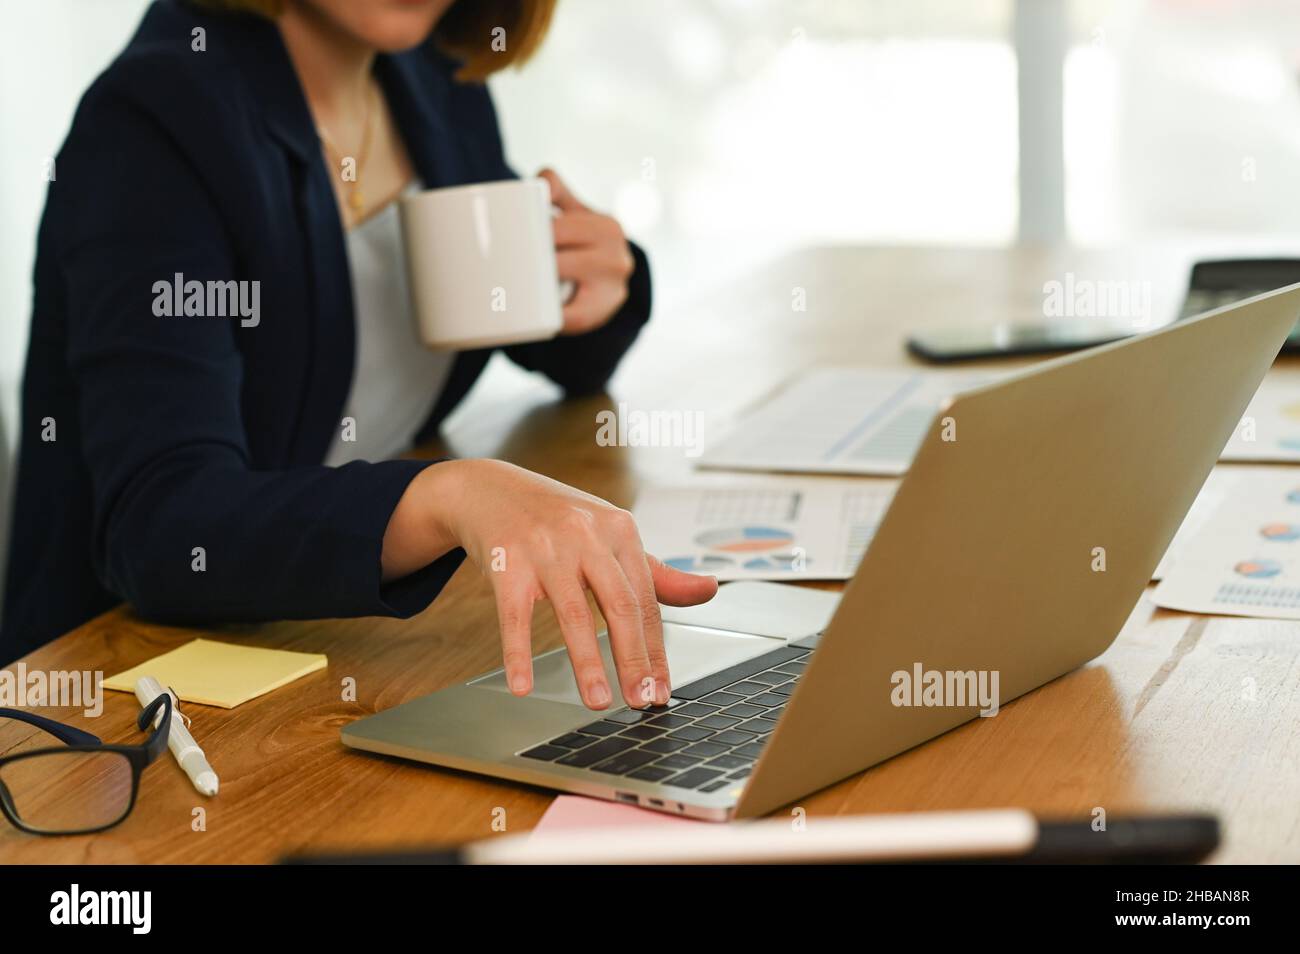 Woman in suit presses, hand on the laptop keyboard and holds coffee with the other hand, a young woman's hand is using laptop keyboard, drinking coffe Stock Photo